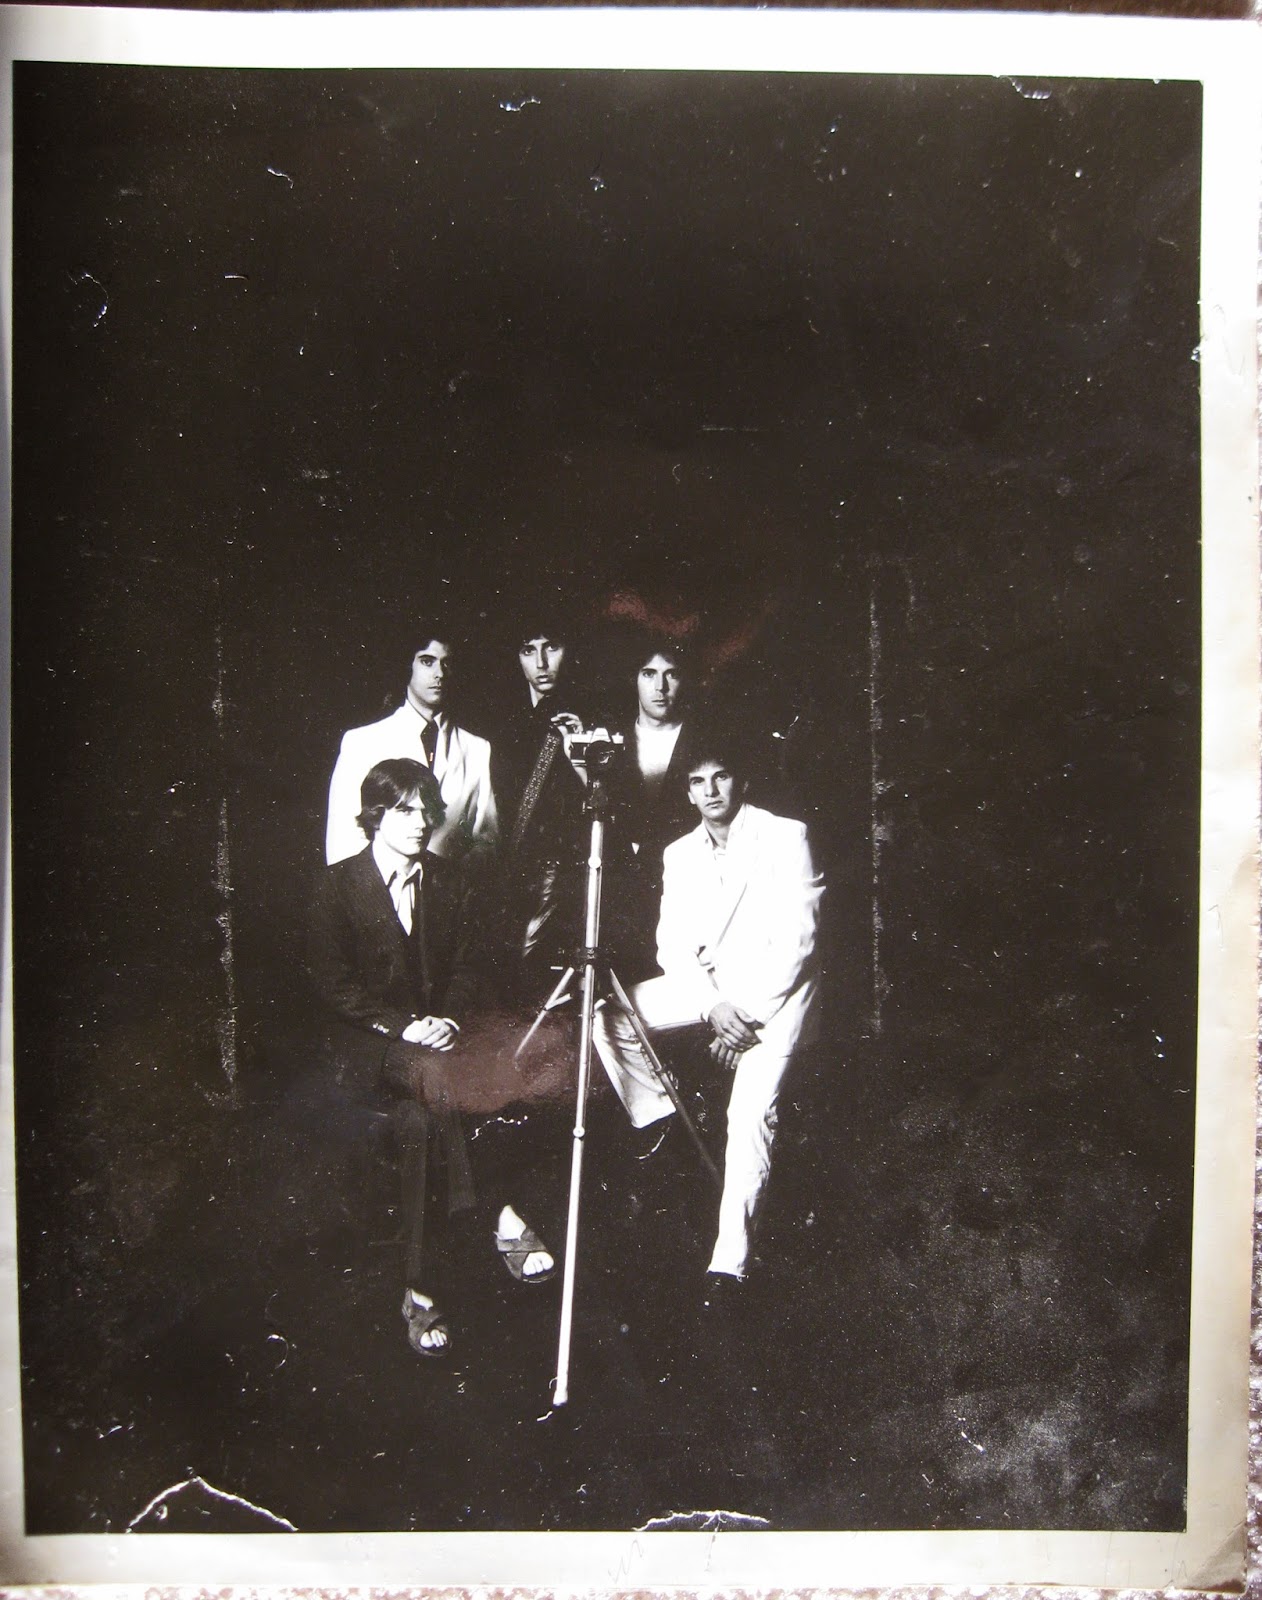 Promo pic I was given from The Soft Parade band back in 1981 at The Factory rock club just days before I shipped out for the navy.